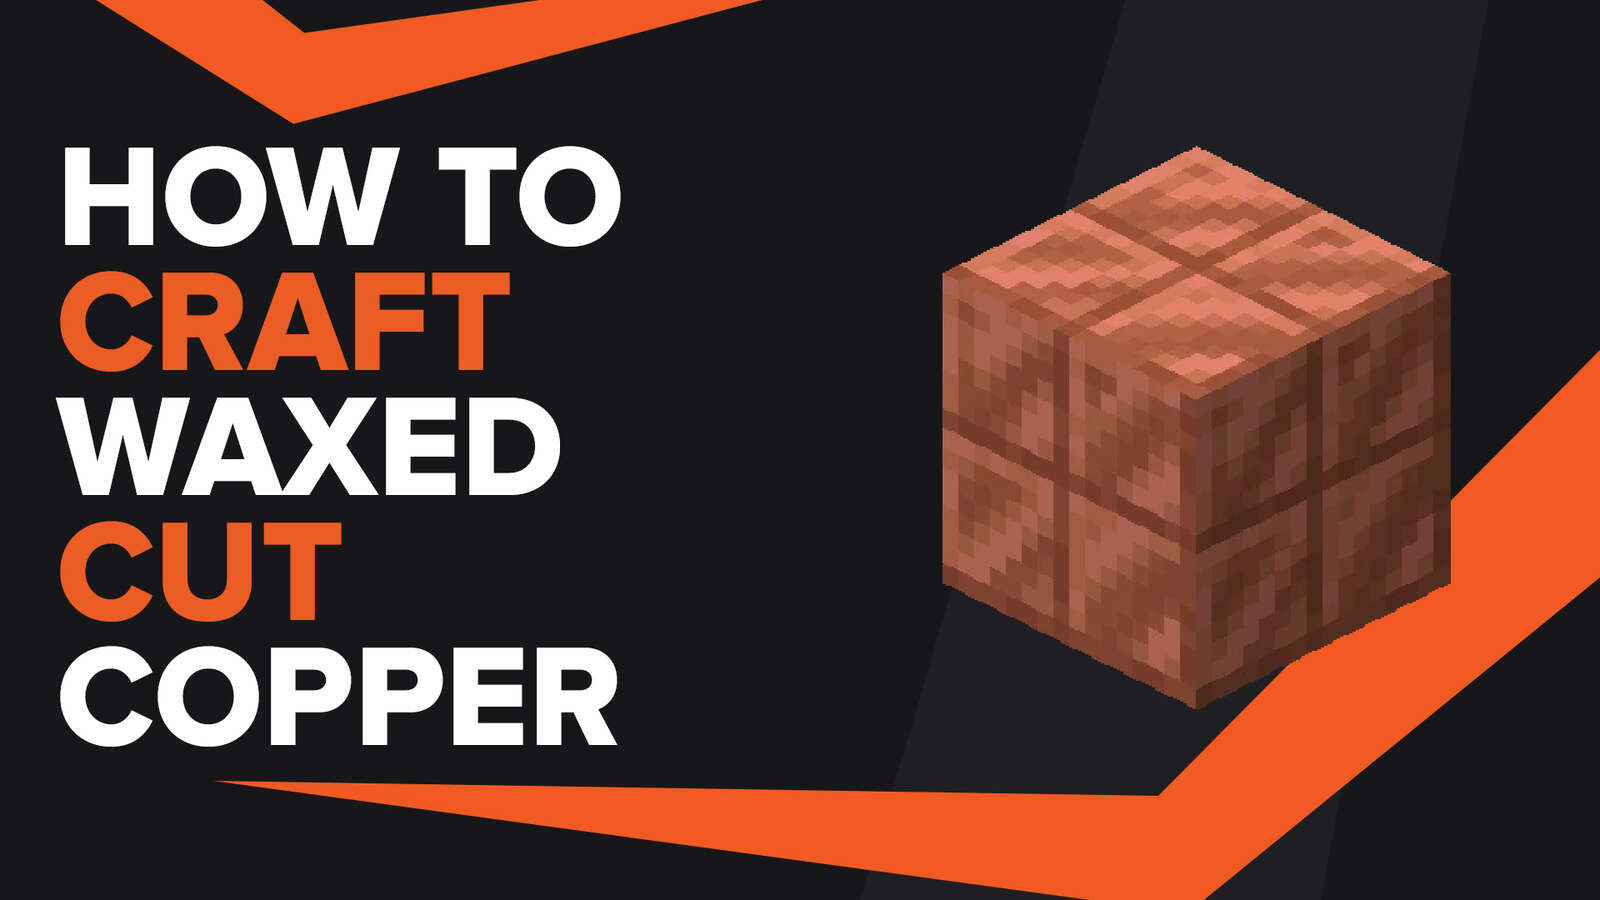 How To Make Waxed Cut Copper In Minecraft